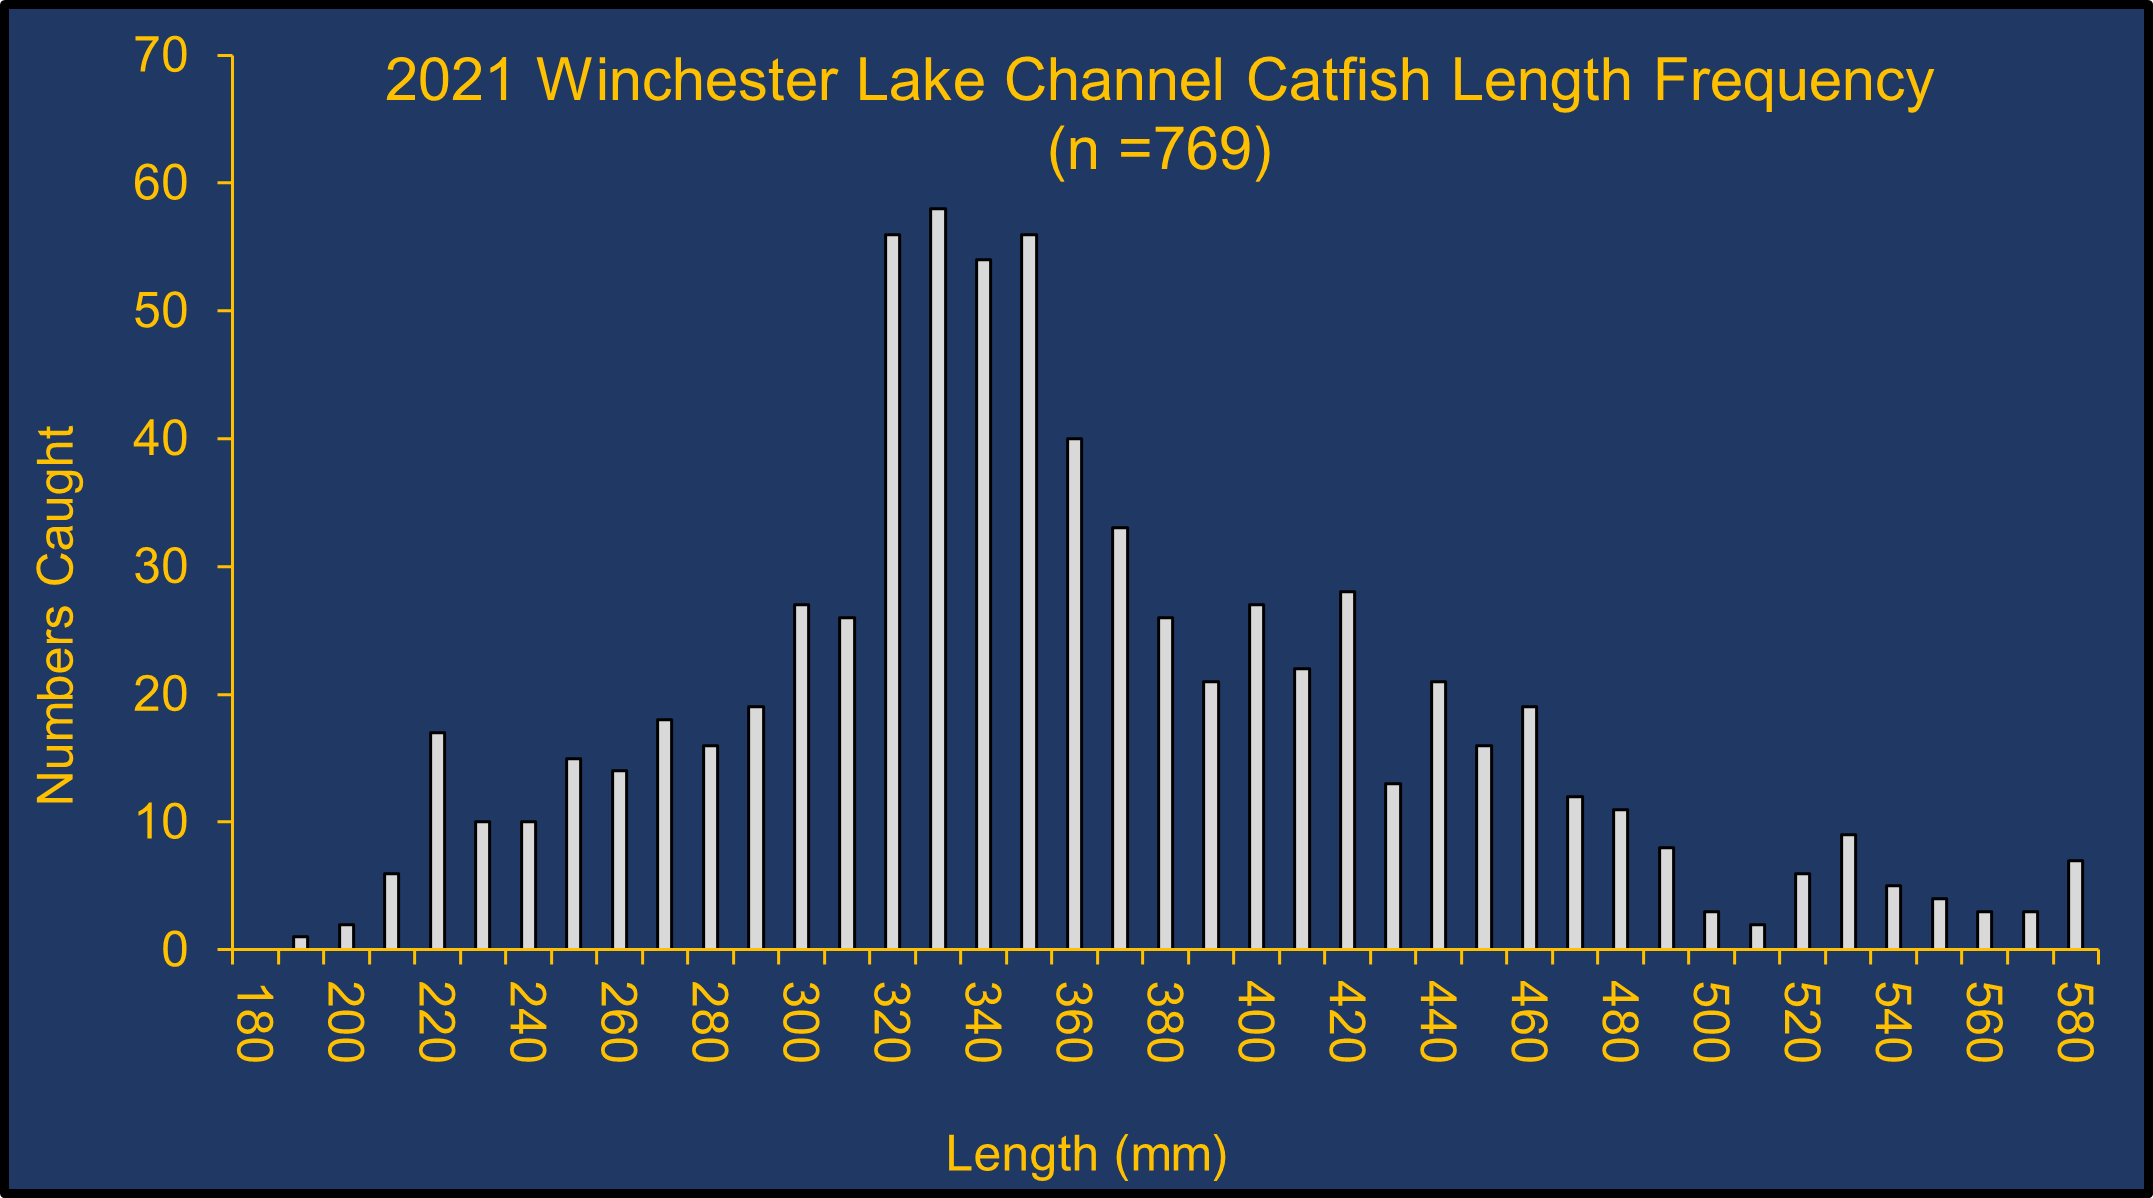 2021 Winchester Lake Channel Catfish Length Frequency